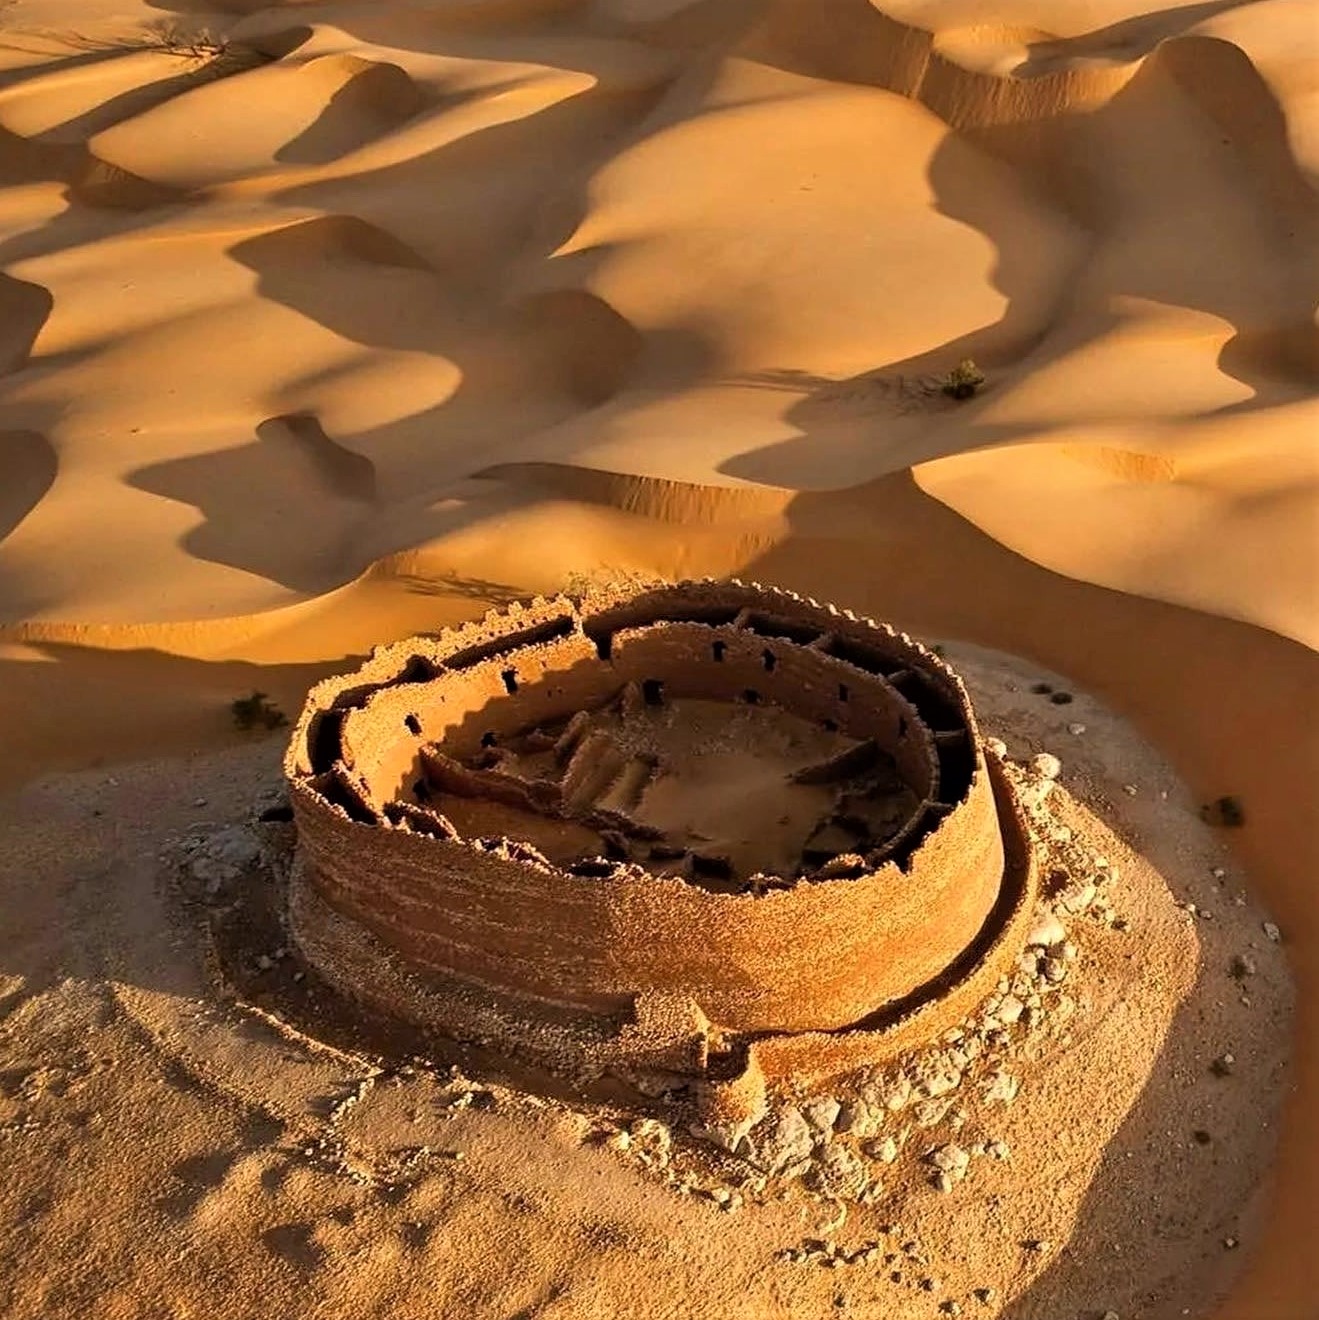 Fortified village: Abandoned habitat from the medieval period, unearthed in Algeria